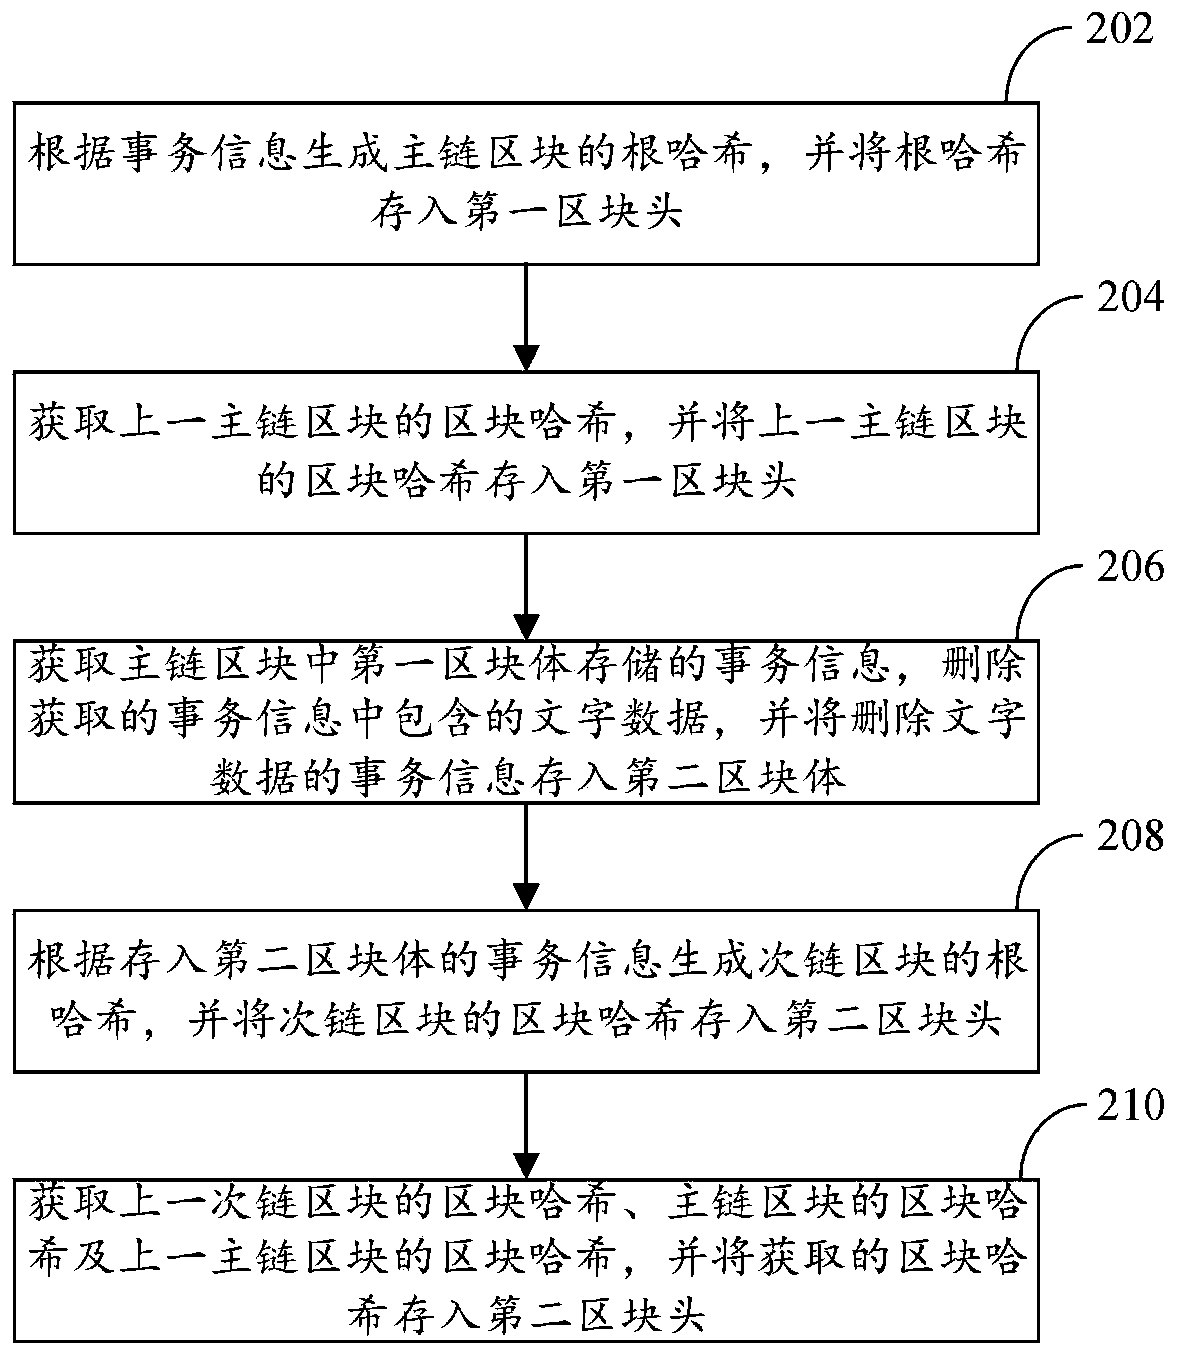 Method and system for controlling harmful information based on block chain